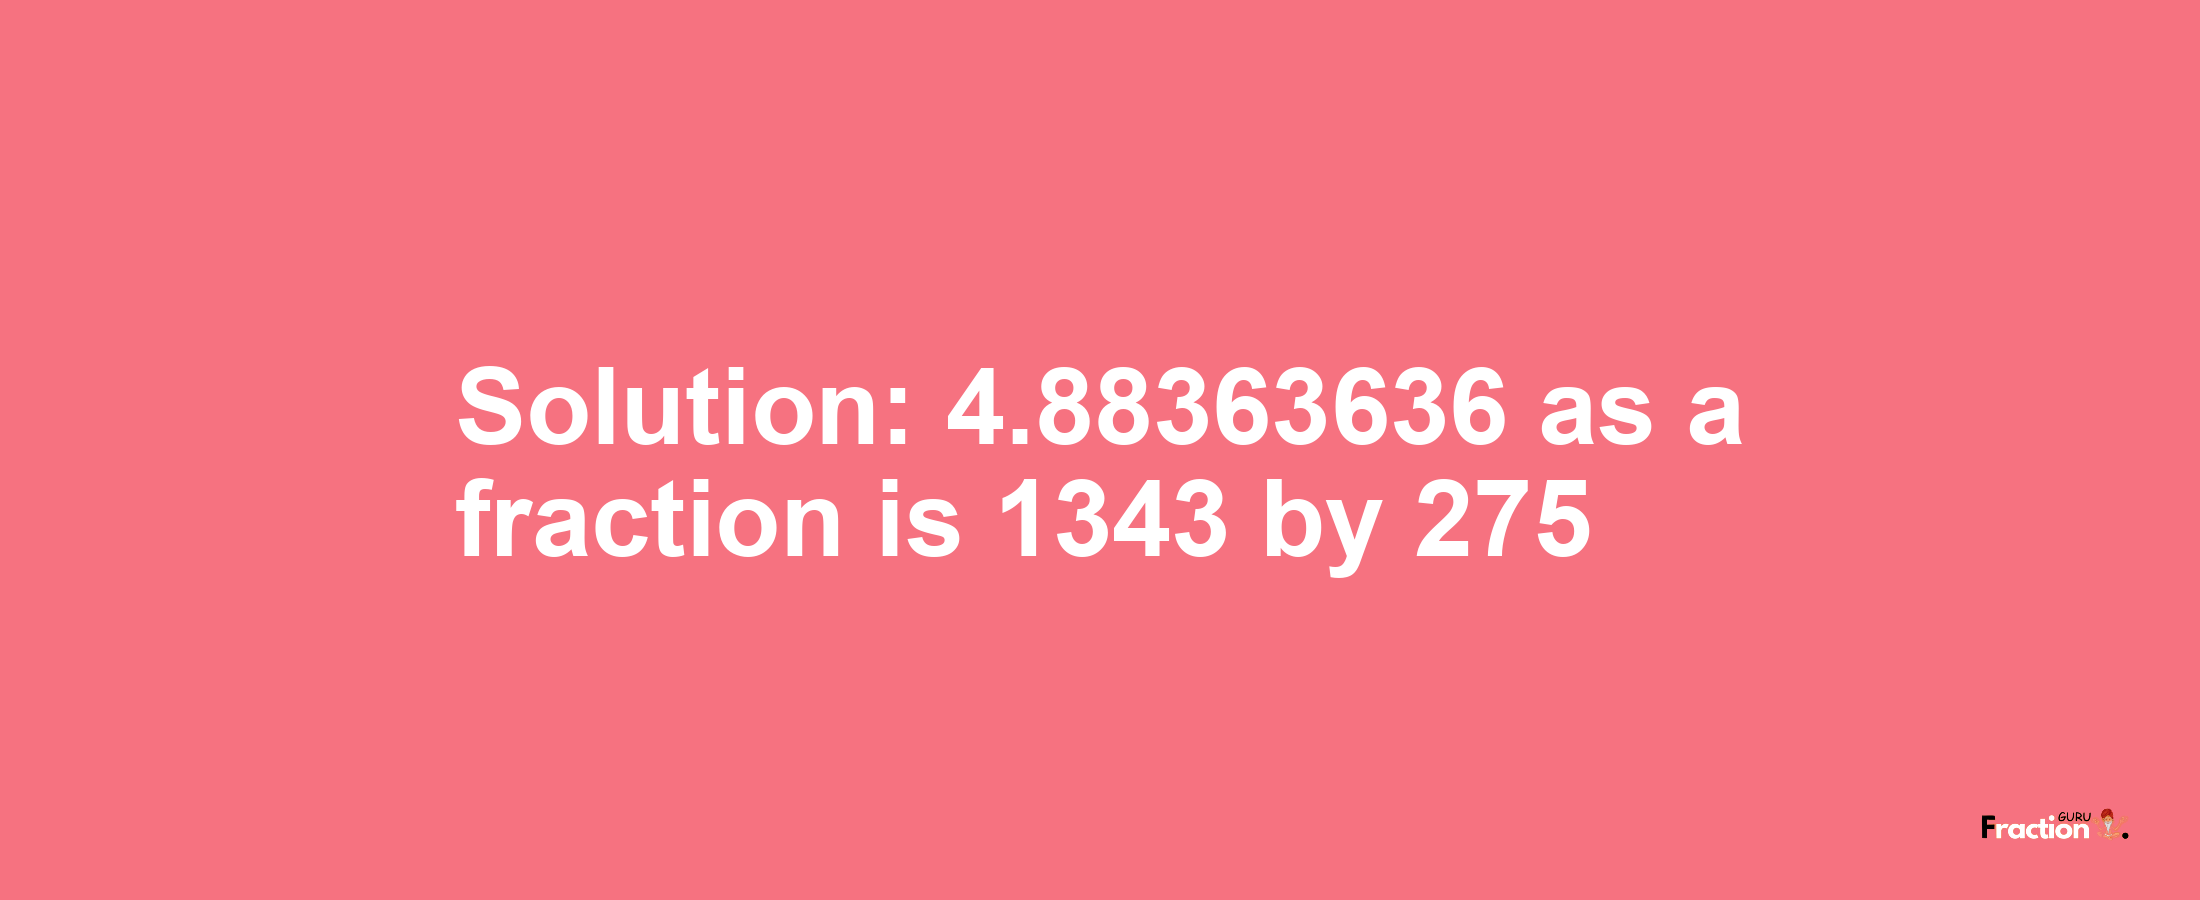 Solution:4.88363636 as a fraction is 1343/275